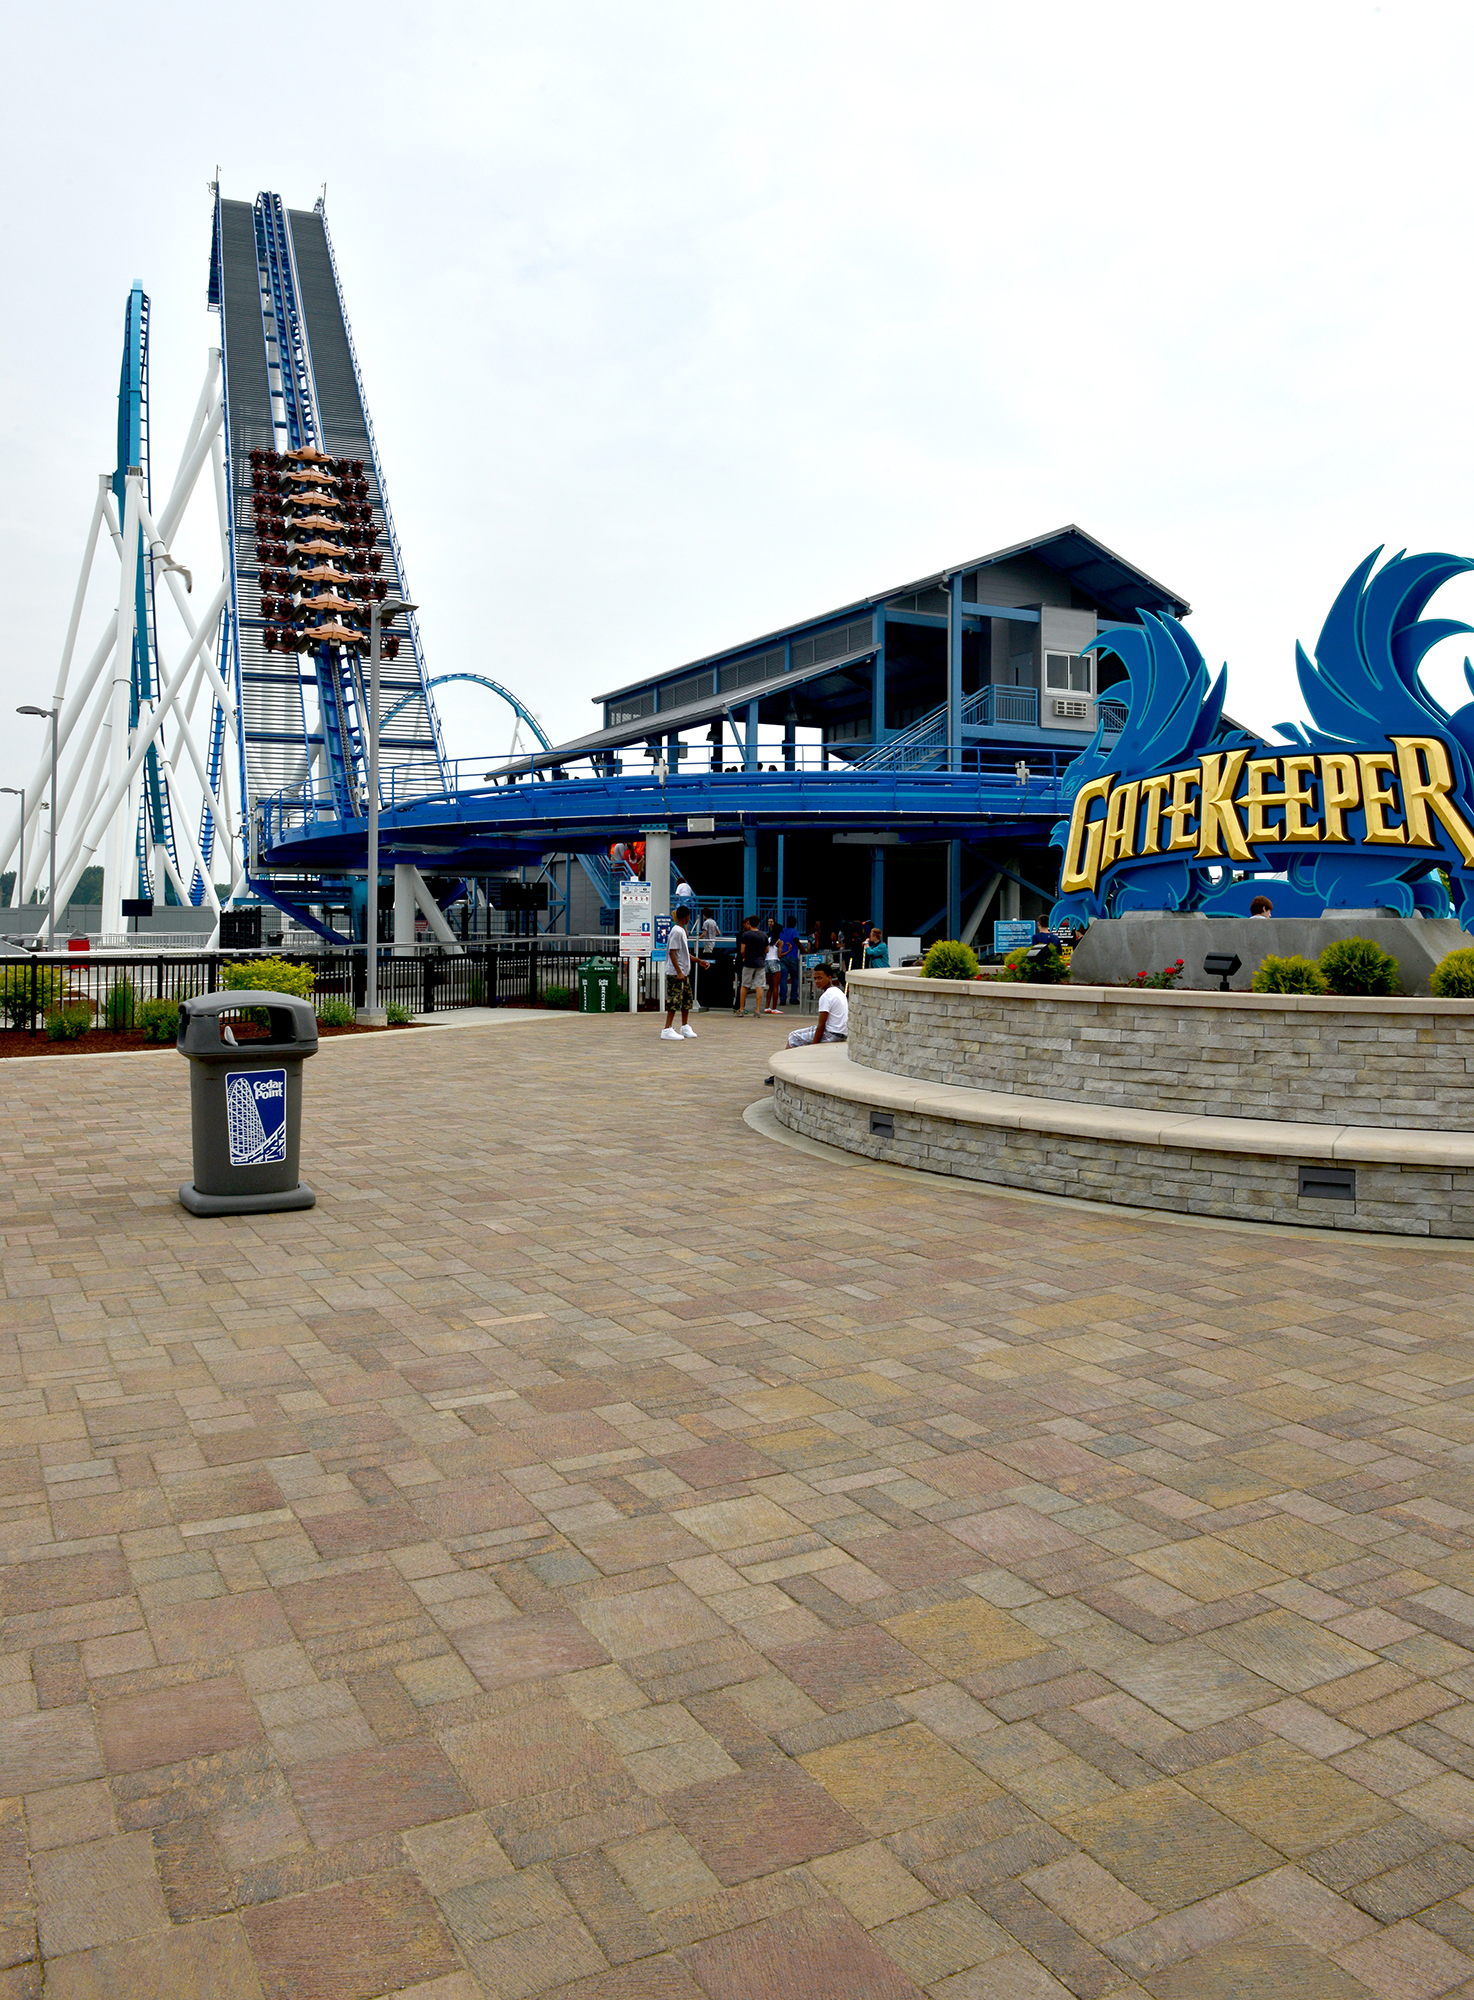 Il Campo pavers encapsulate the Gatekeeper rollercoaster signage, with several enclosed retaining walls lining the outer fence.